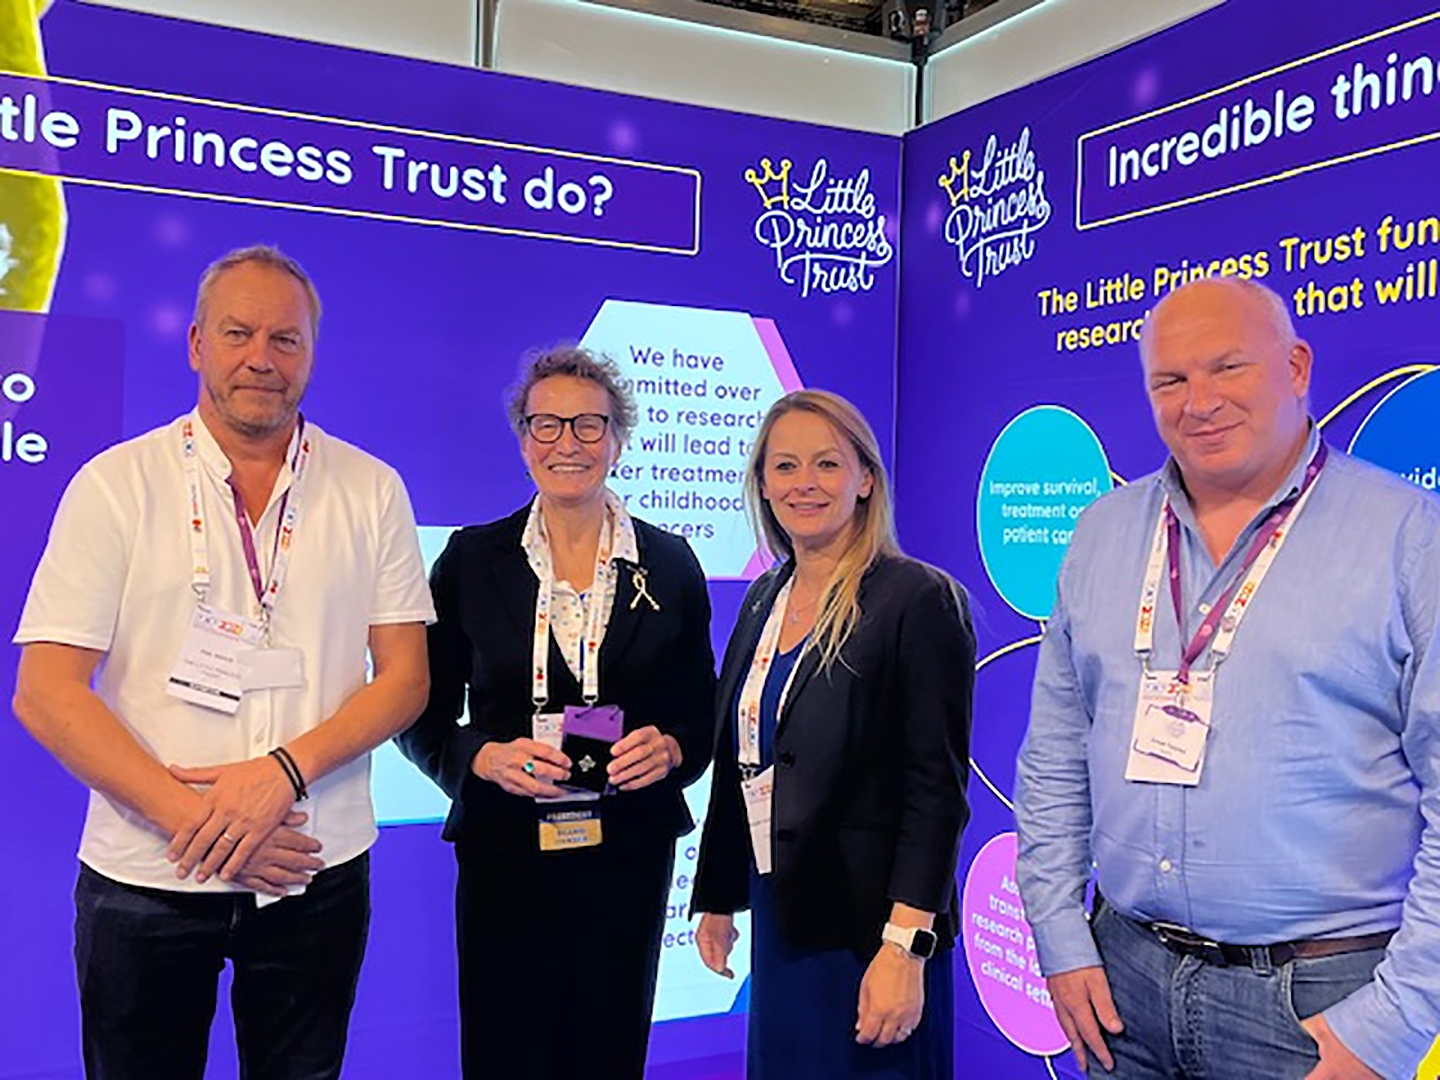 Phil Wendy and Simon from The Little Princess Trust pictured with Kathy Pritchard-Jones Is President of SIOP and Professor of Paediatric Oncology at University College London (UCL) Great Ormond Street Institute of Child Health. London, UK